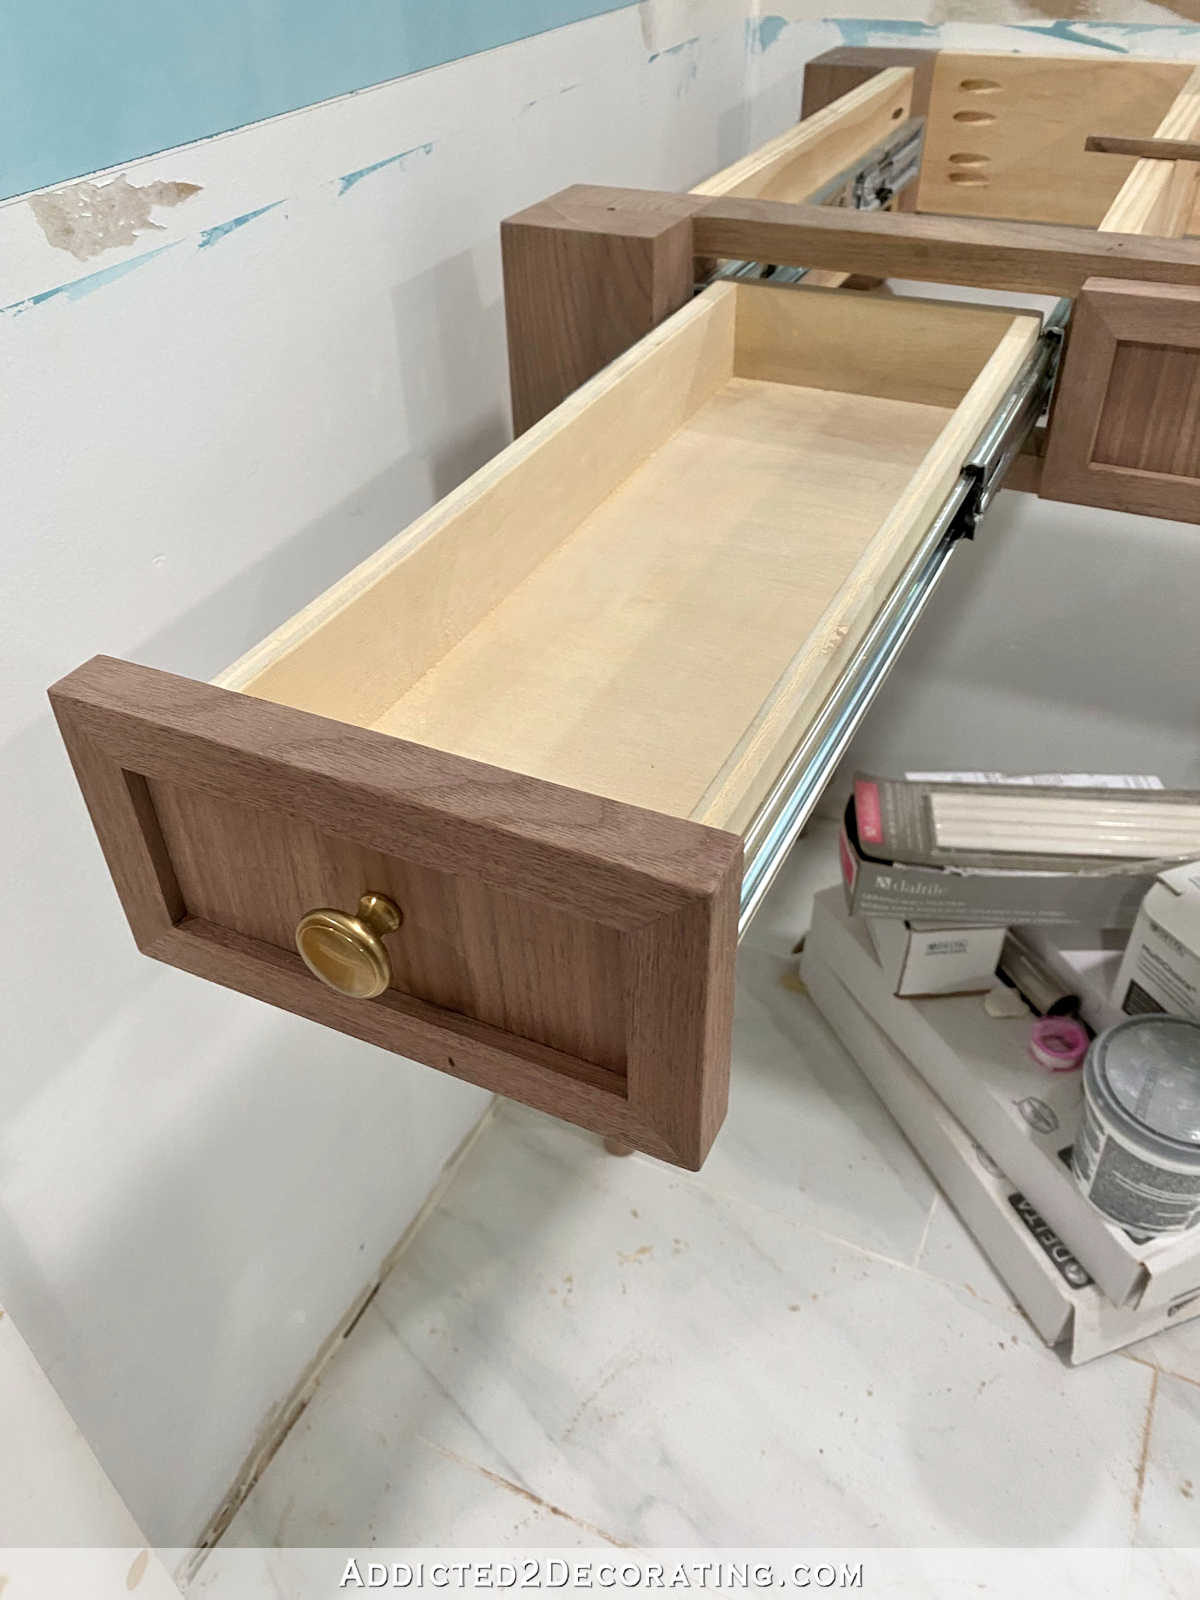 DIY Table-Style Bathroom Vanity With Drawers – Finished! (Part 2 — Making The Drawer Fronts)